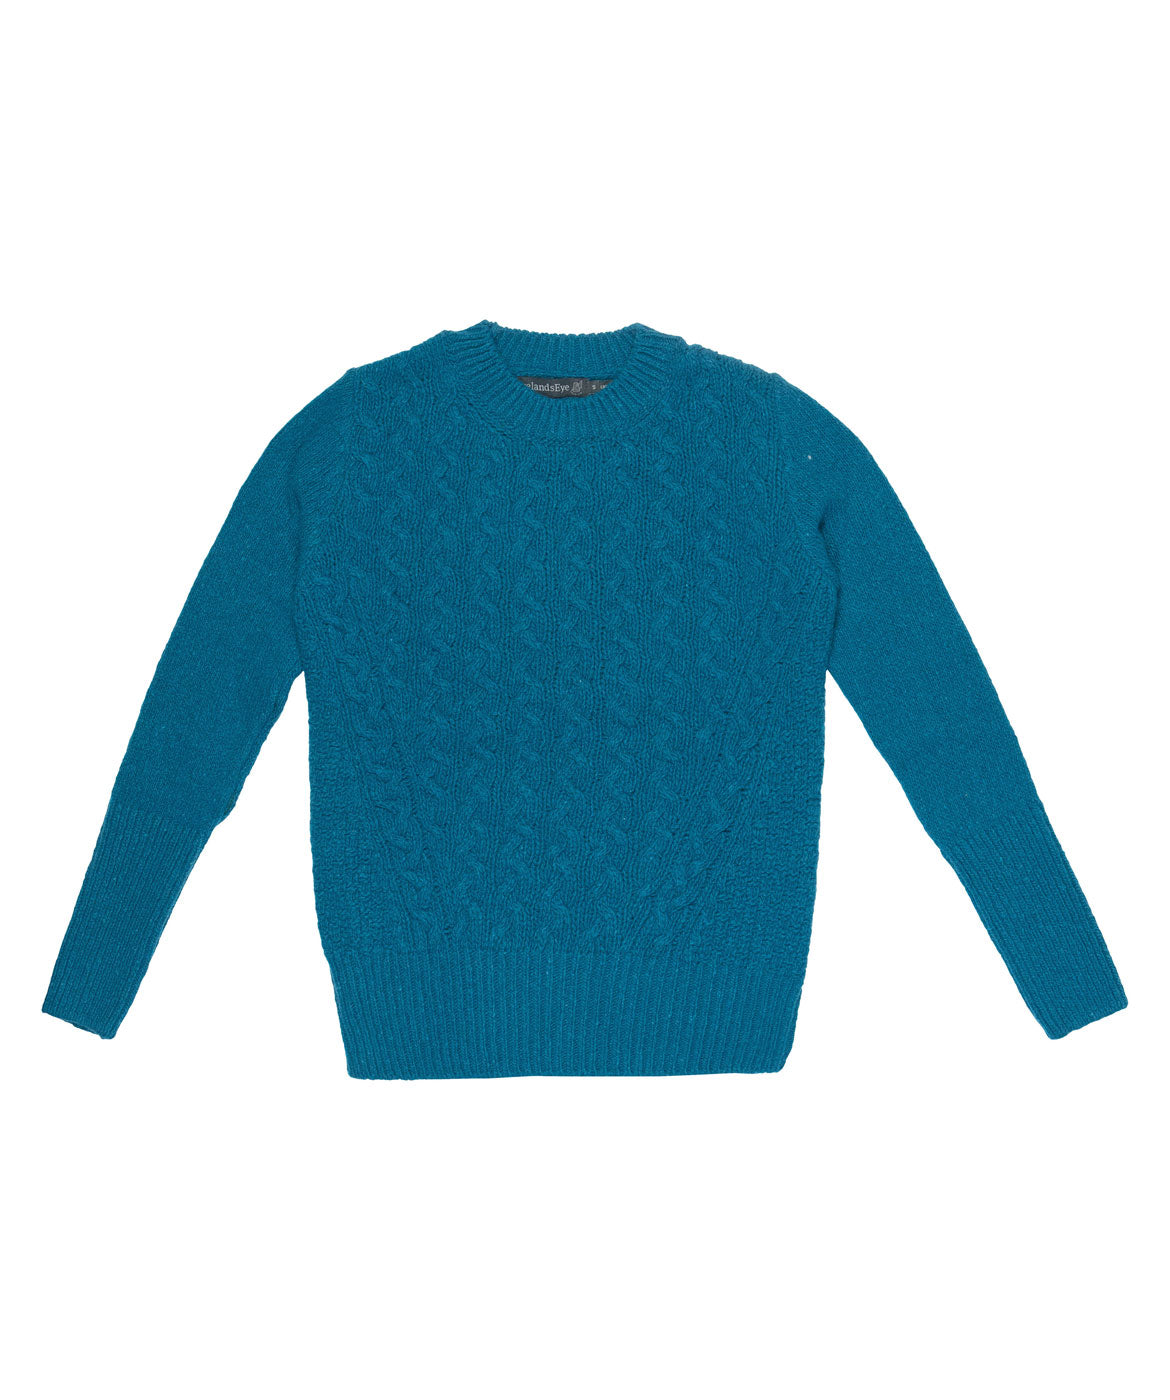 IrelandsEye Knitwear Kilcrea Cable Round Neck Sweater Teal Harbour